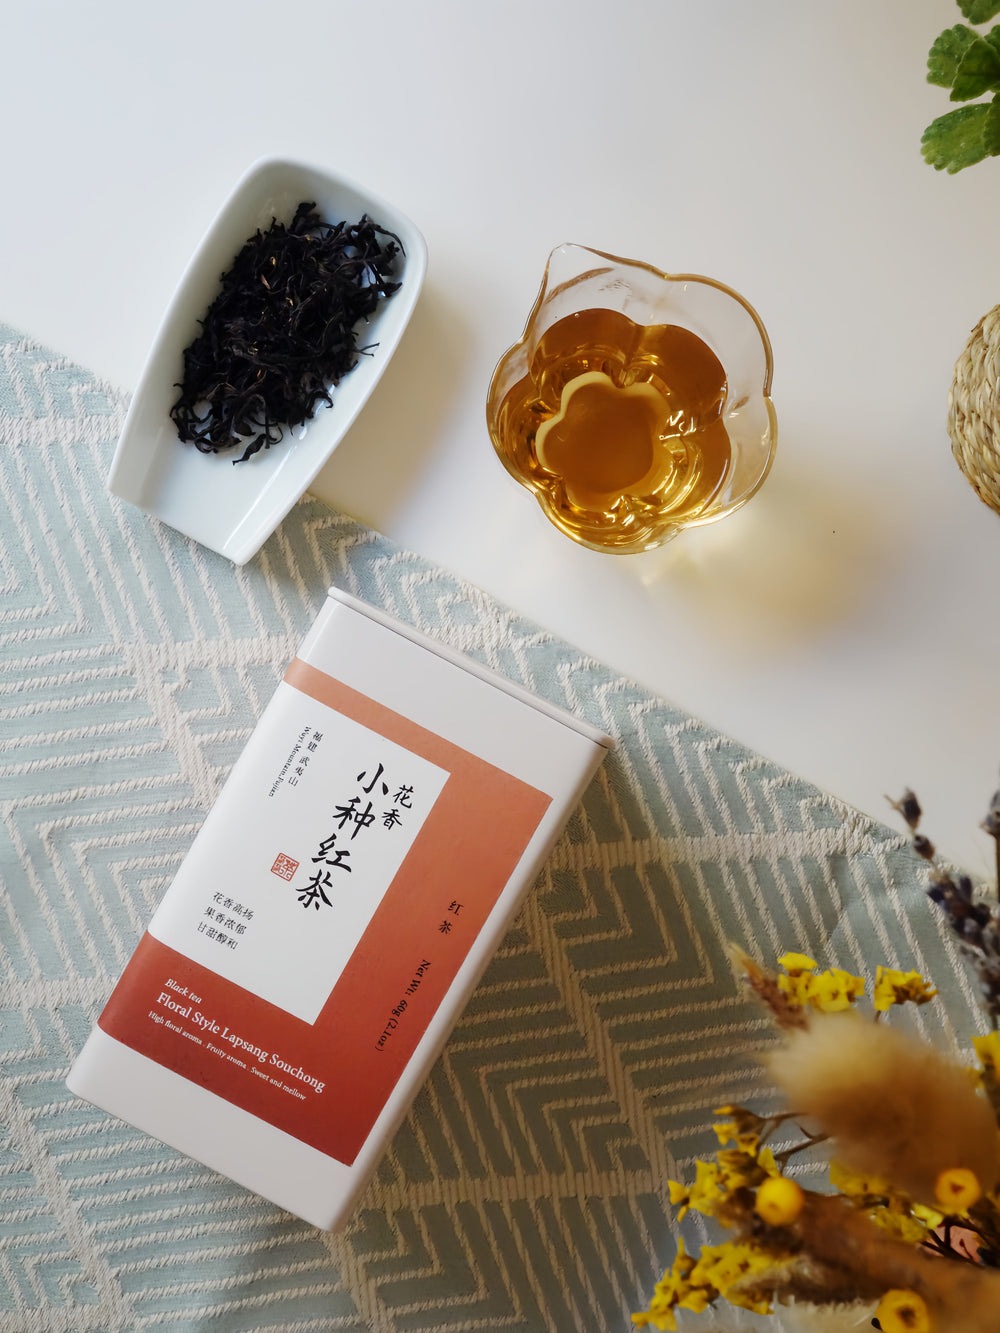 Lapsang Souchong (floral style) 花香小种红茶